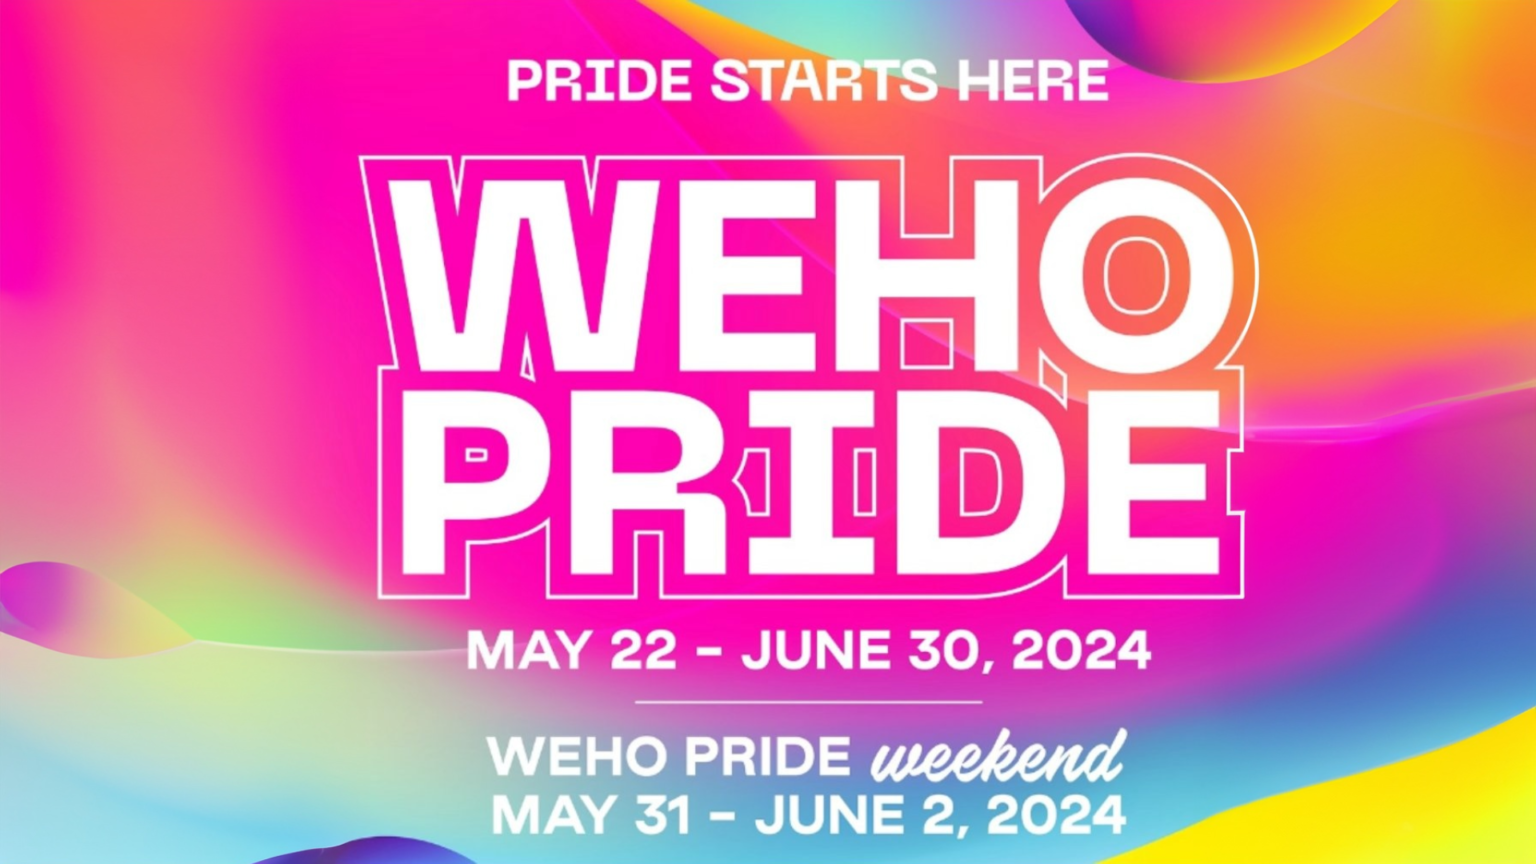 WEHO PRIDE 2024 🏳️‍🌈 Events, dates and how you can participate